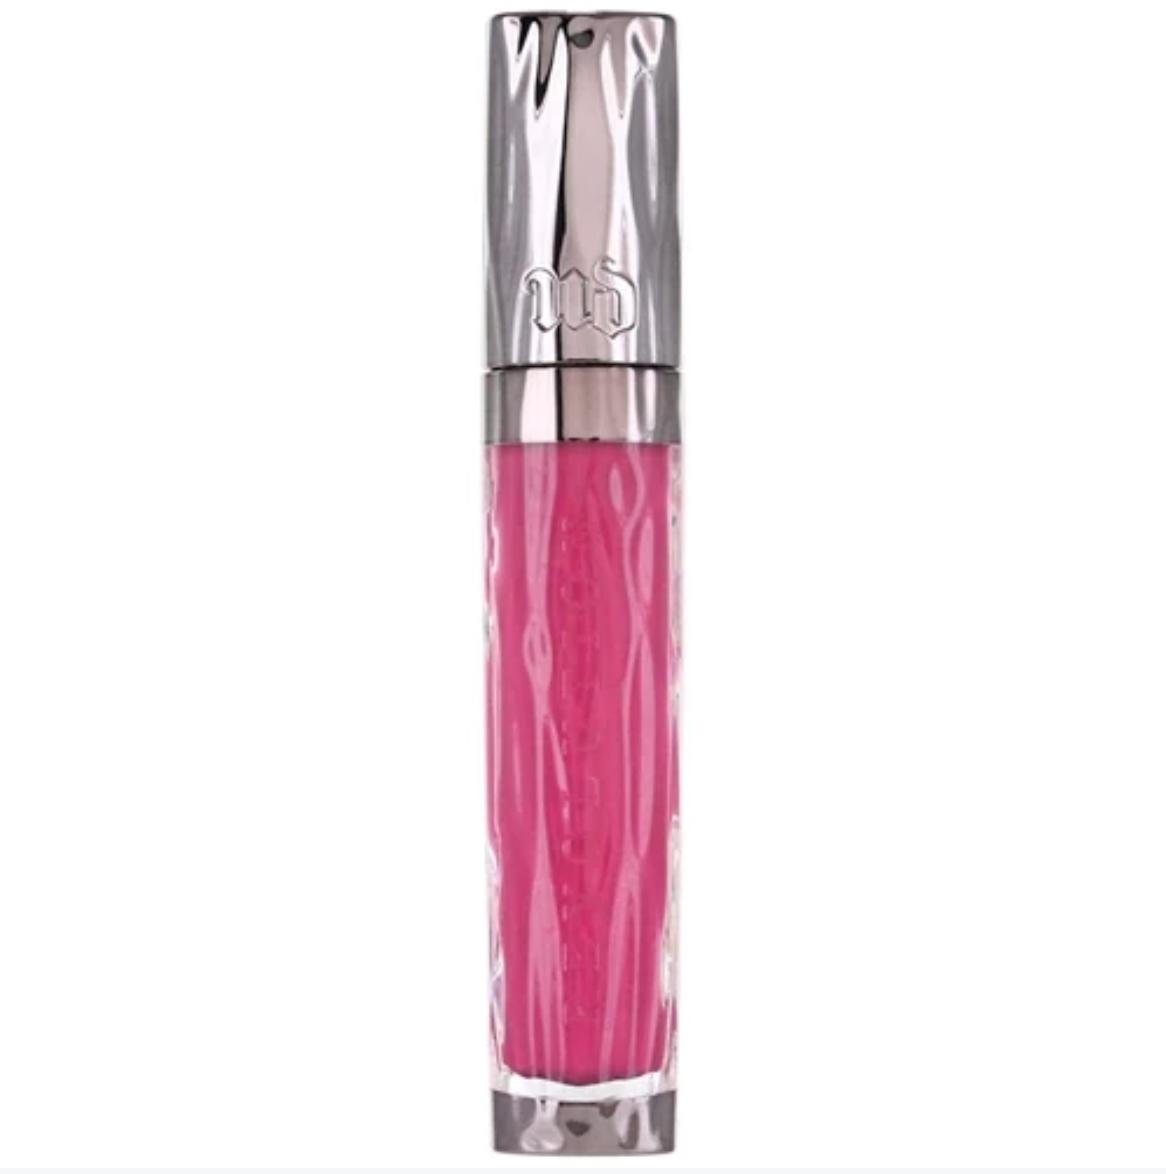 Urban Decay High-Color Lipgloss Anarchy Travel Size